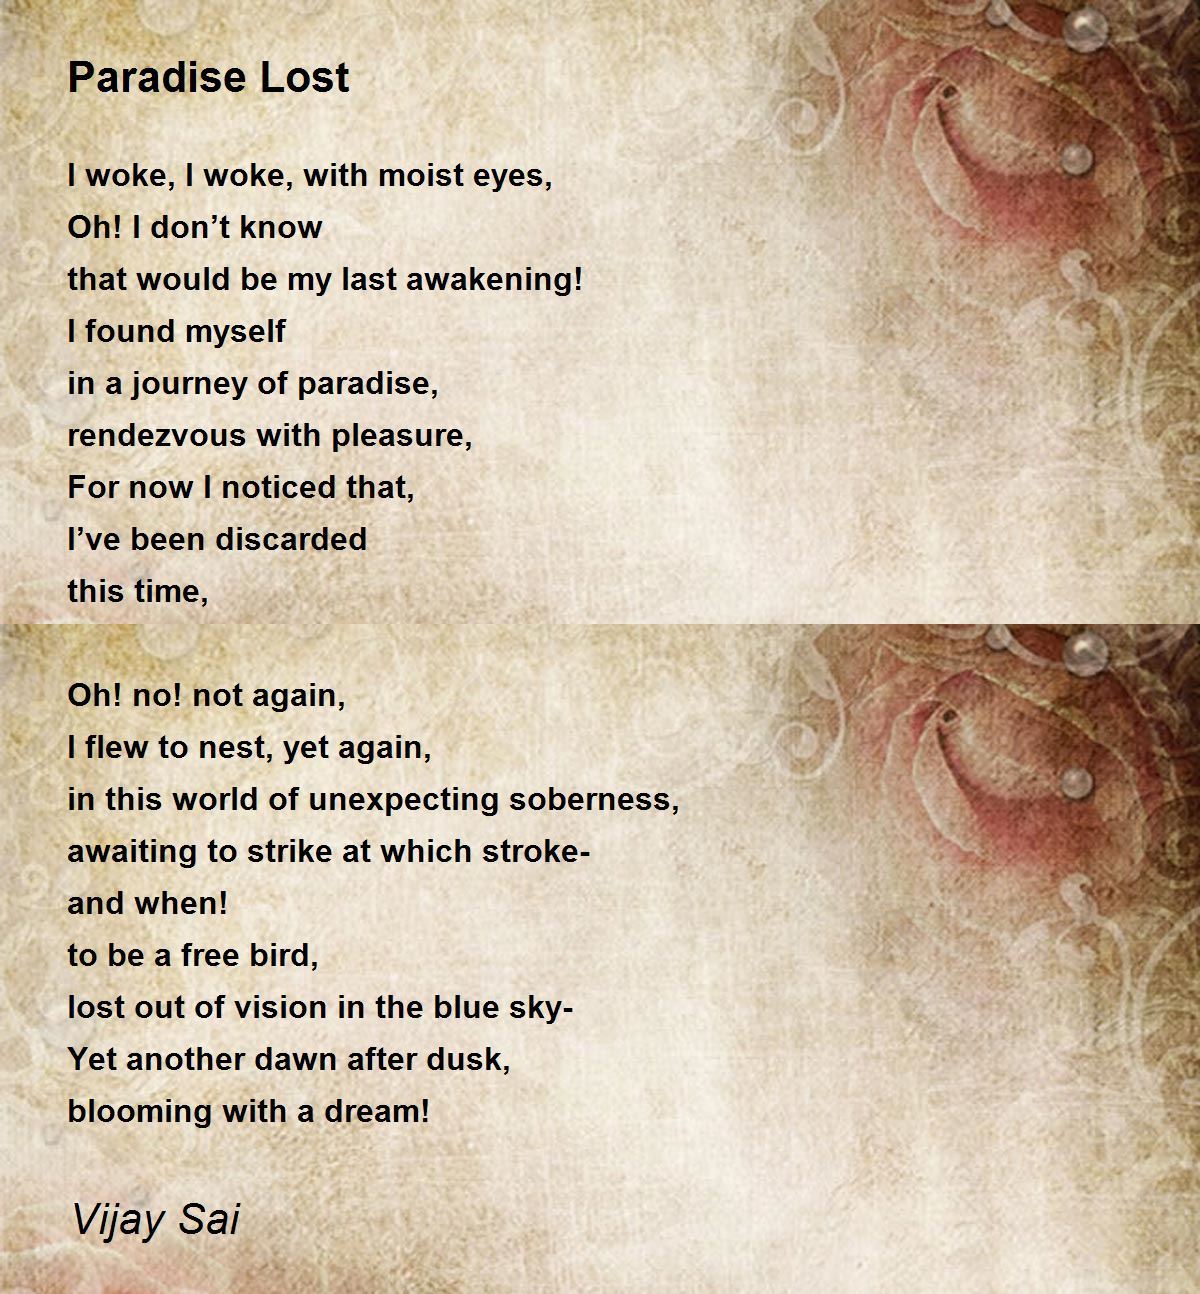 paradise lost meaning